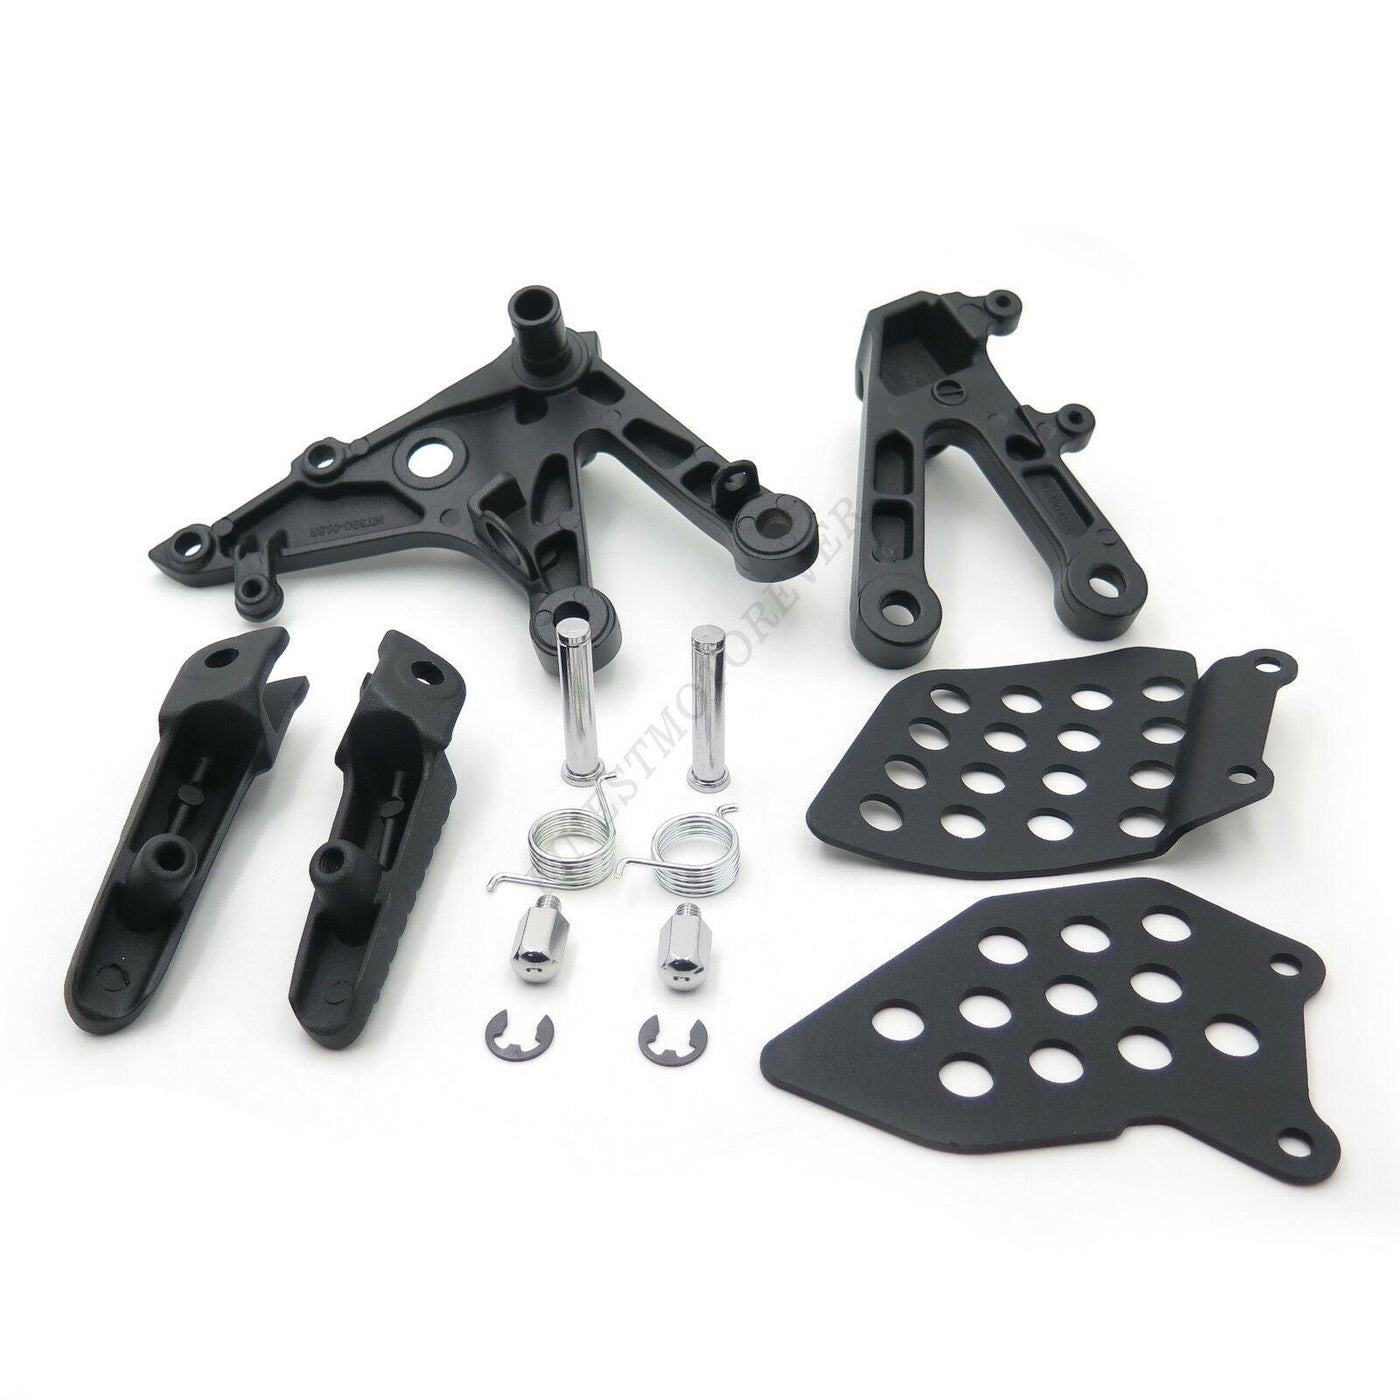 Black Front Rider Foot Pegs Bracket Fit For Honda Cbr600Rr Rr 2007 2008-2014 - Moto Life Products